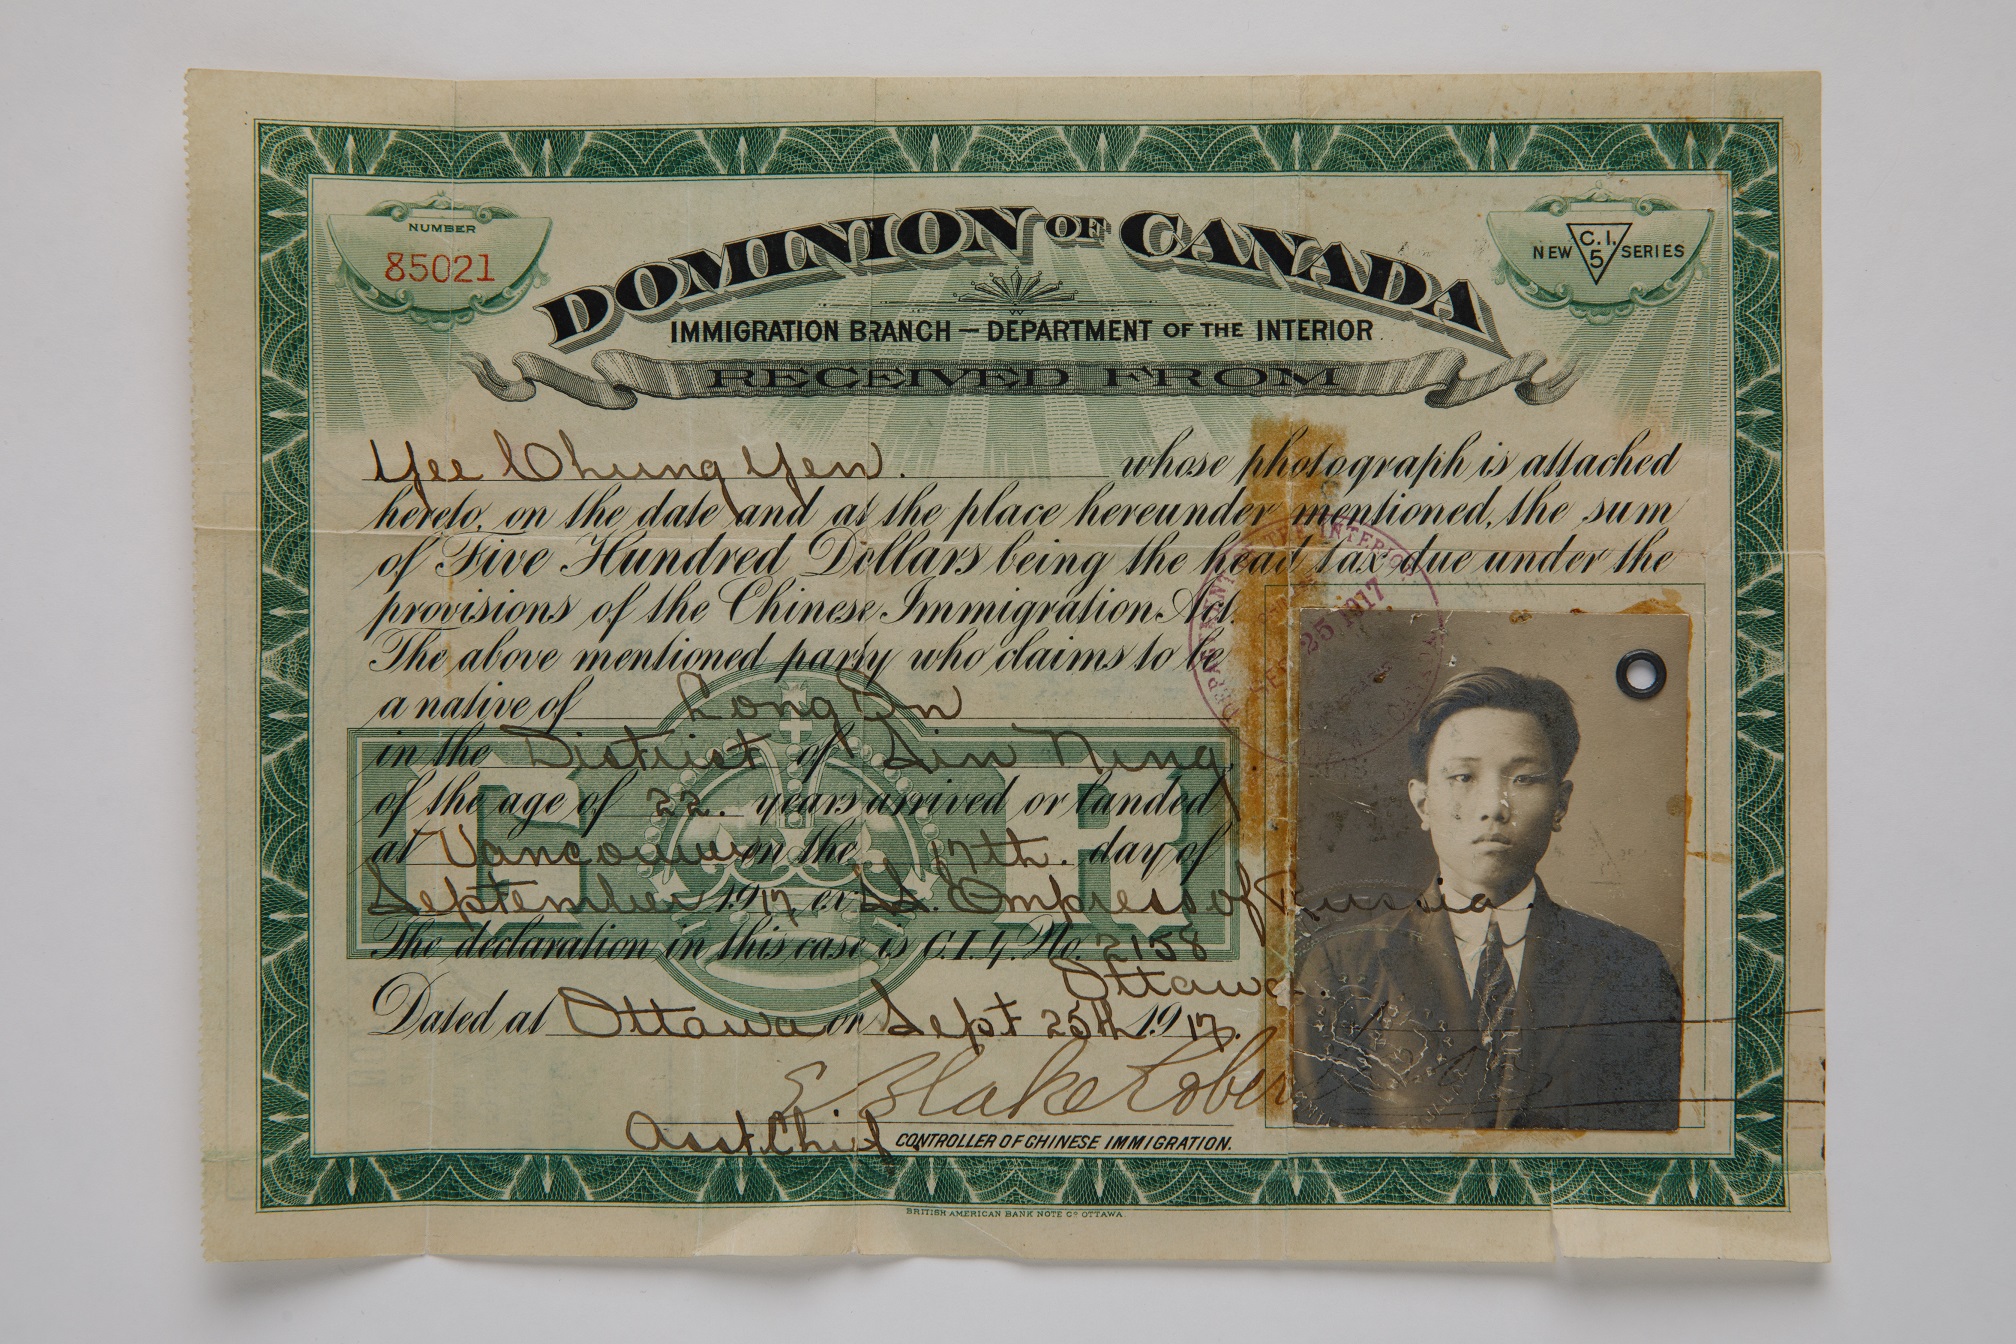 Photograph of a Head Tax Certificate. Along the top reads, “Dominion of Canada / Immigration Branch – Department of the Interior”, and in the bottom right corner is a identifiaction photo of a serious-looking young man wearing a dark suit.